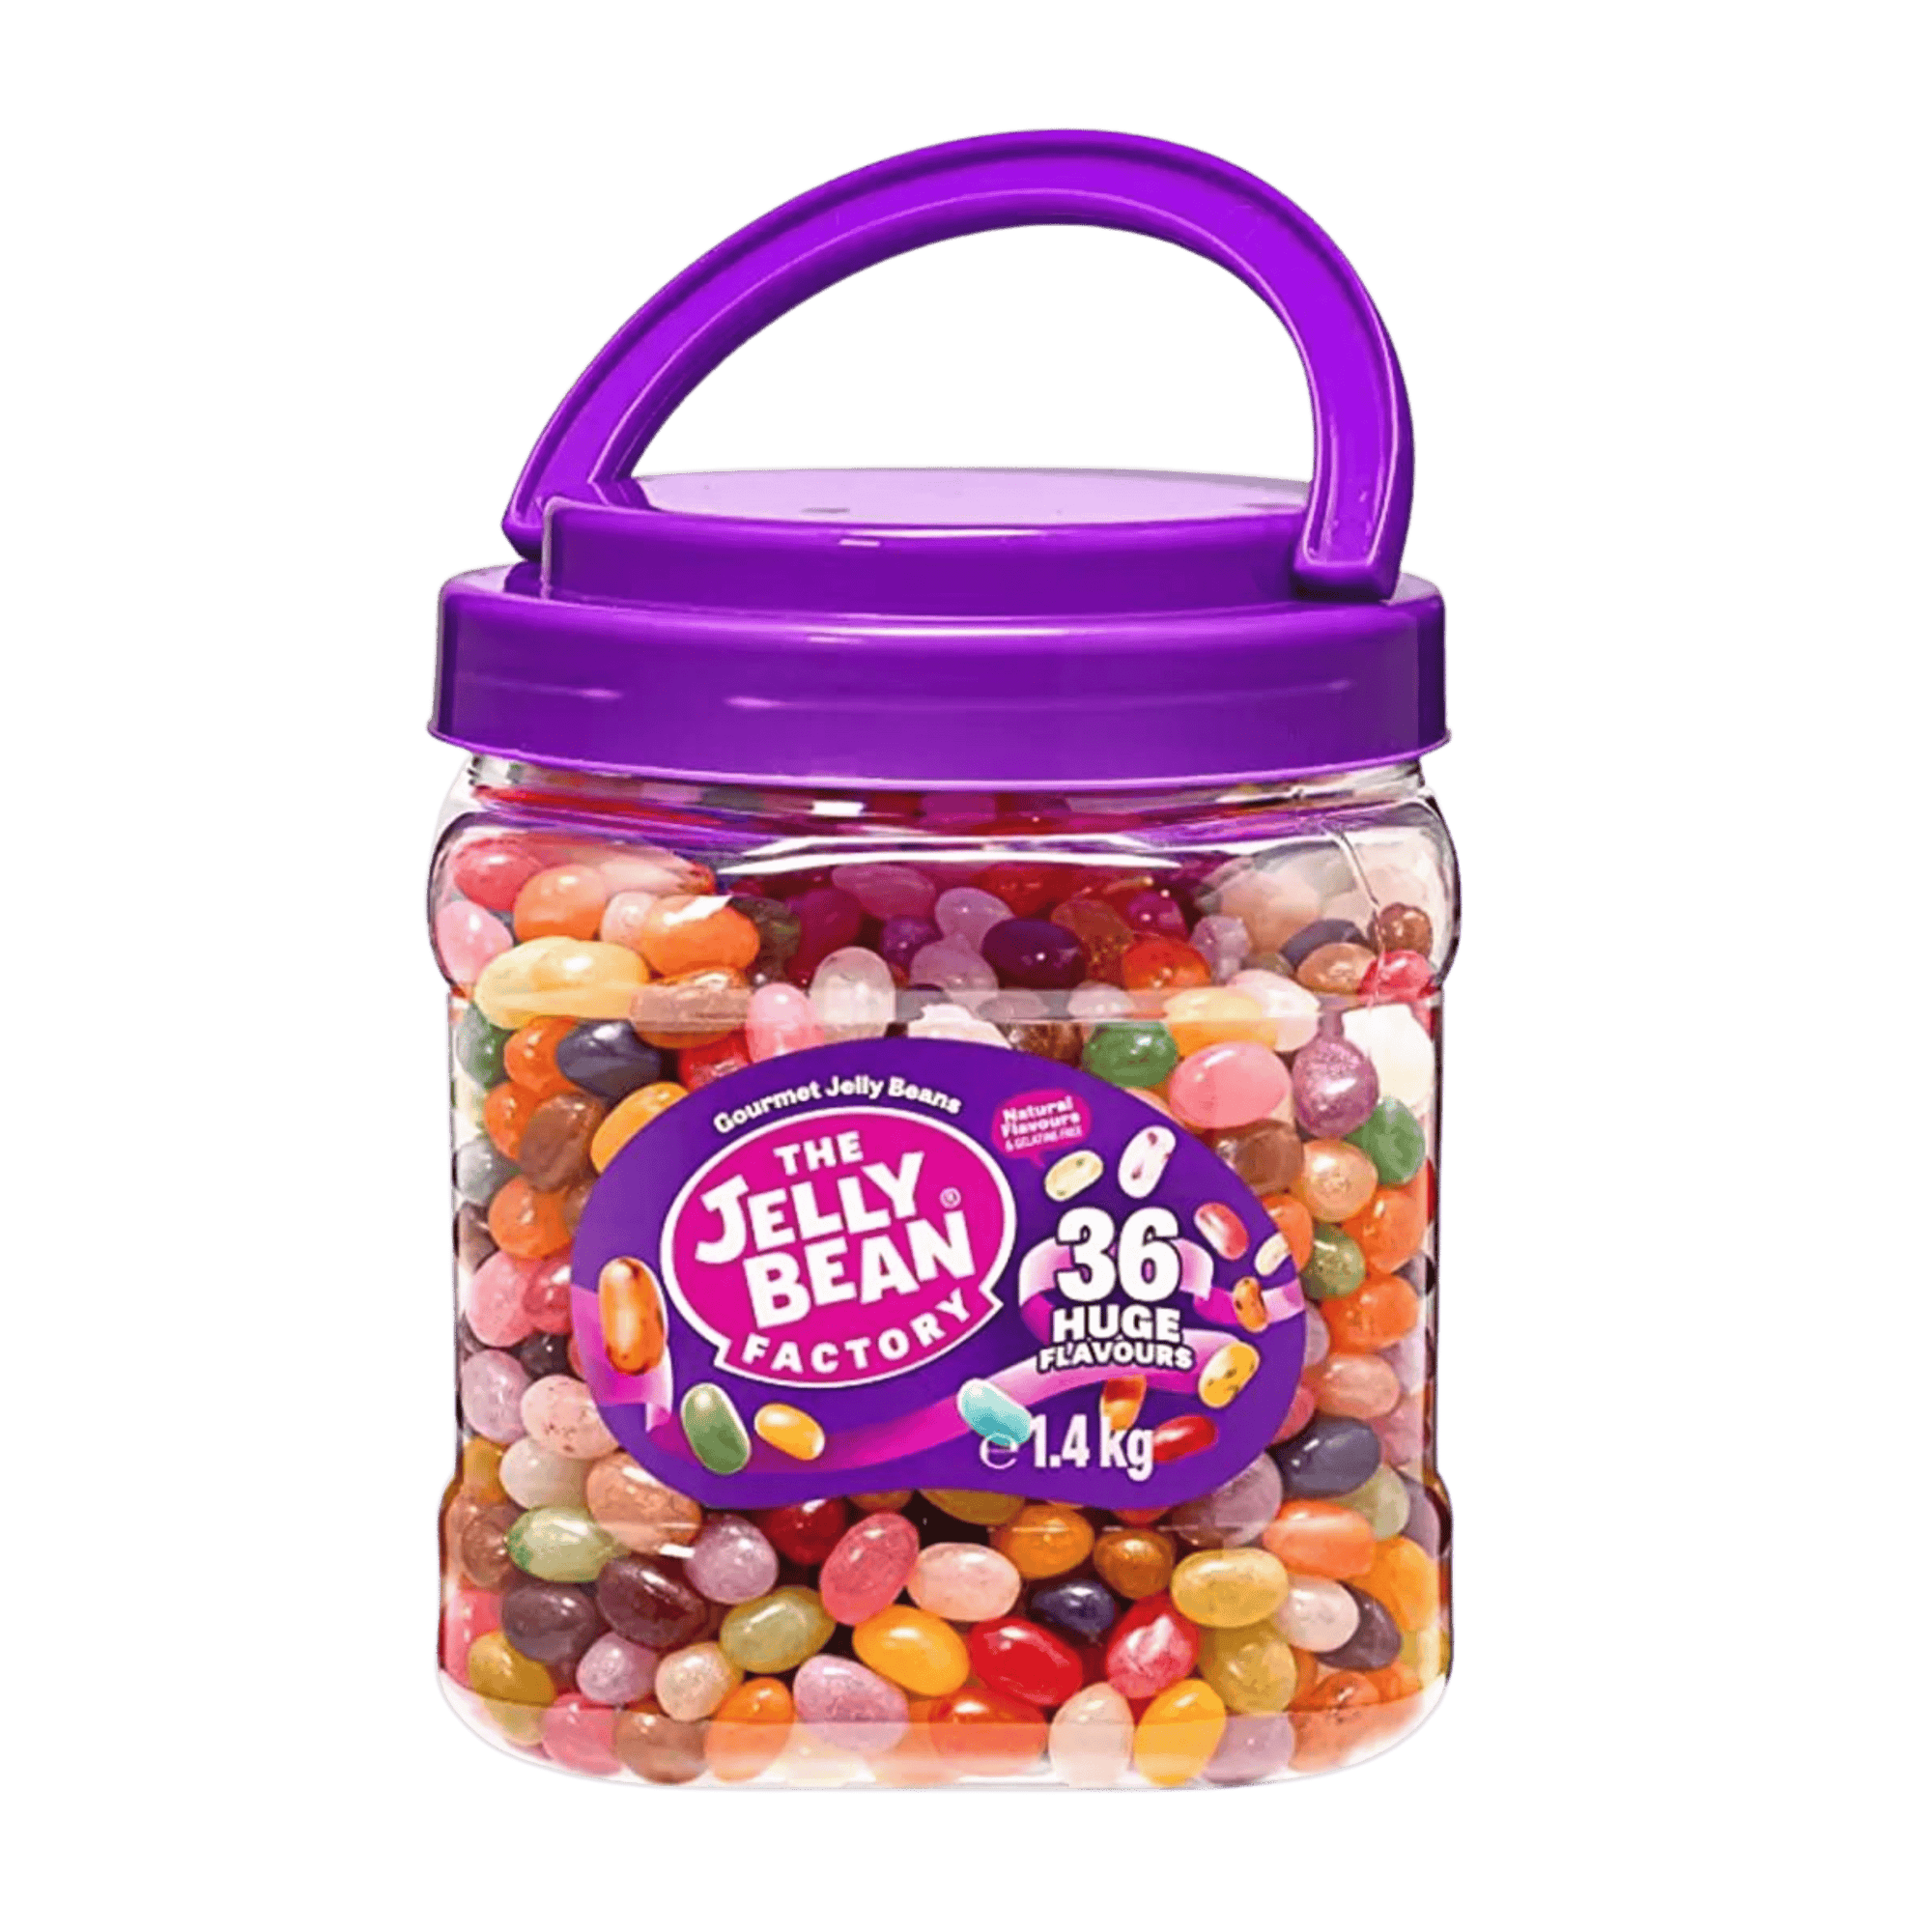 The Jelly Bean Factory 36 Flavour Mix - 1.4kg - Nammi.net